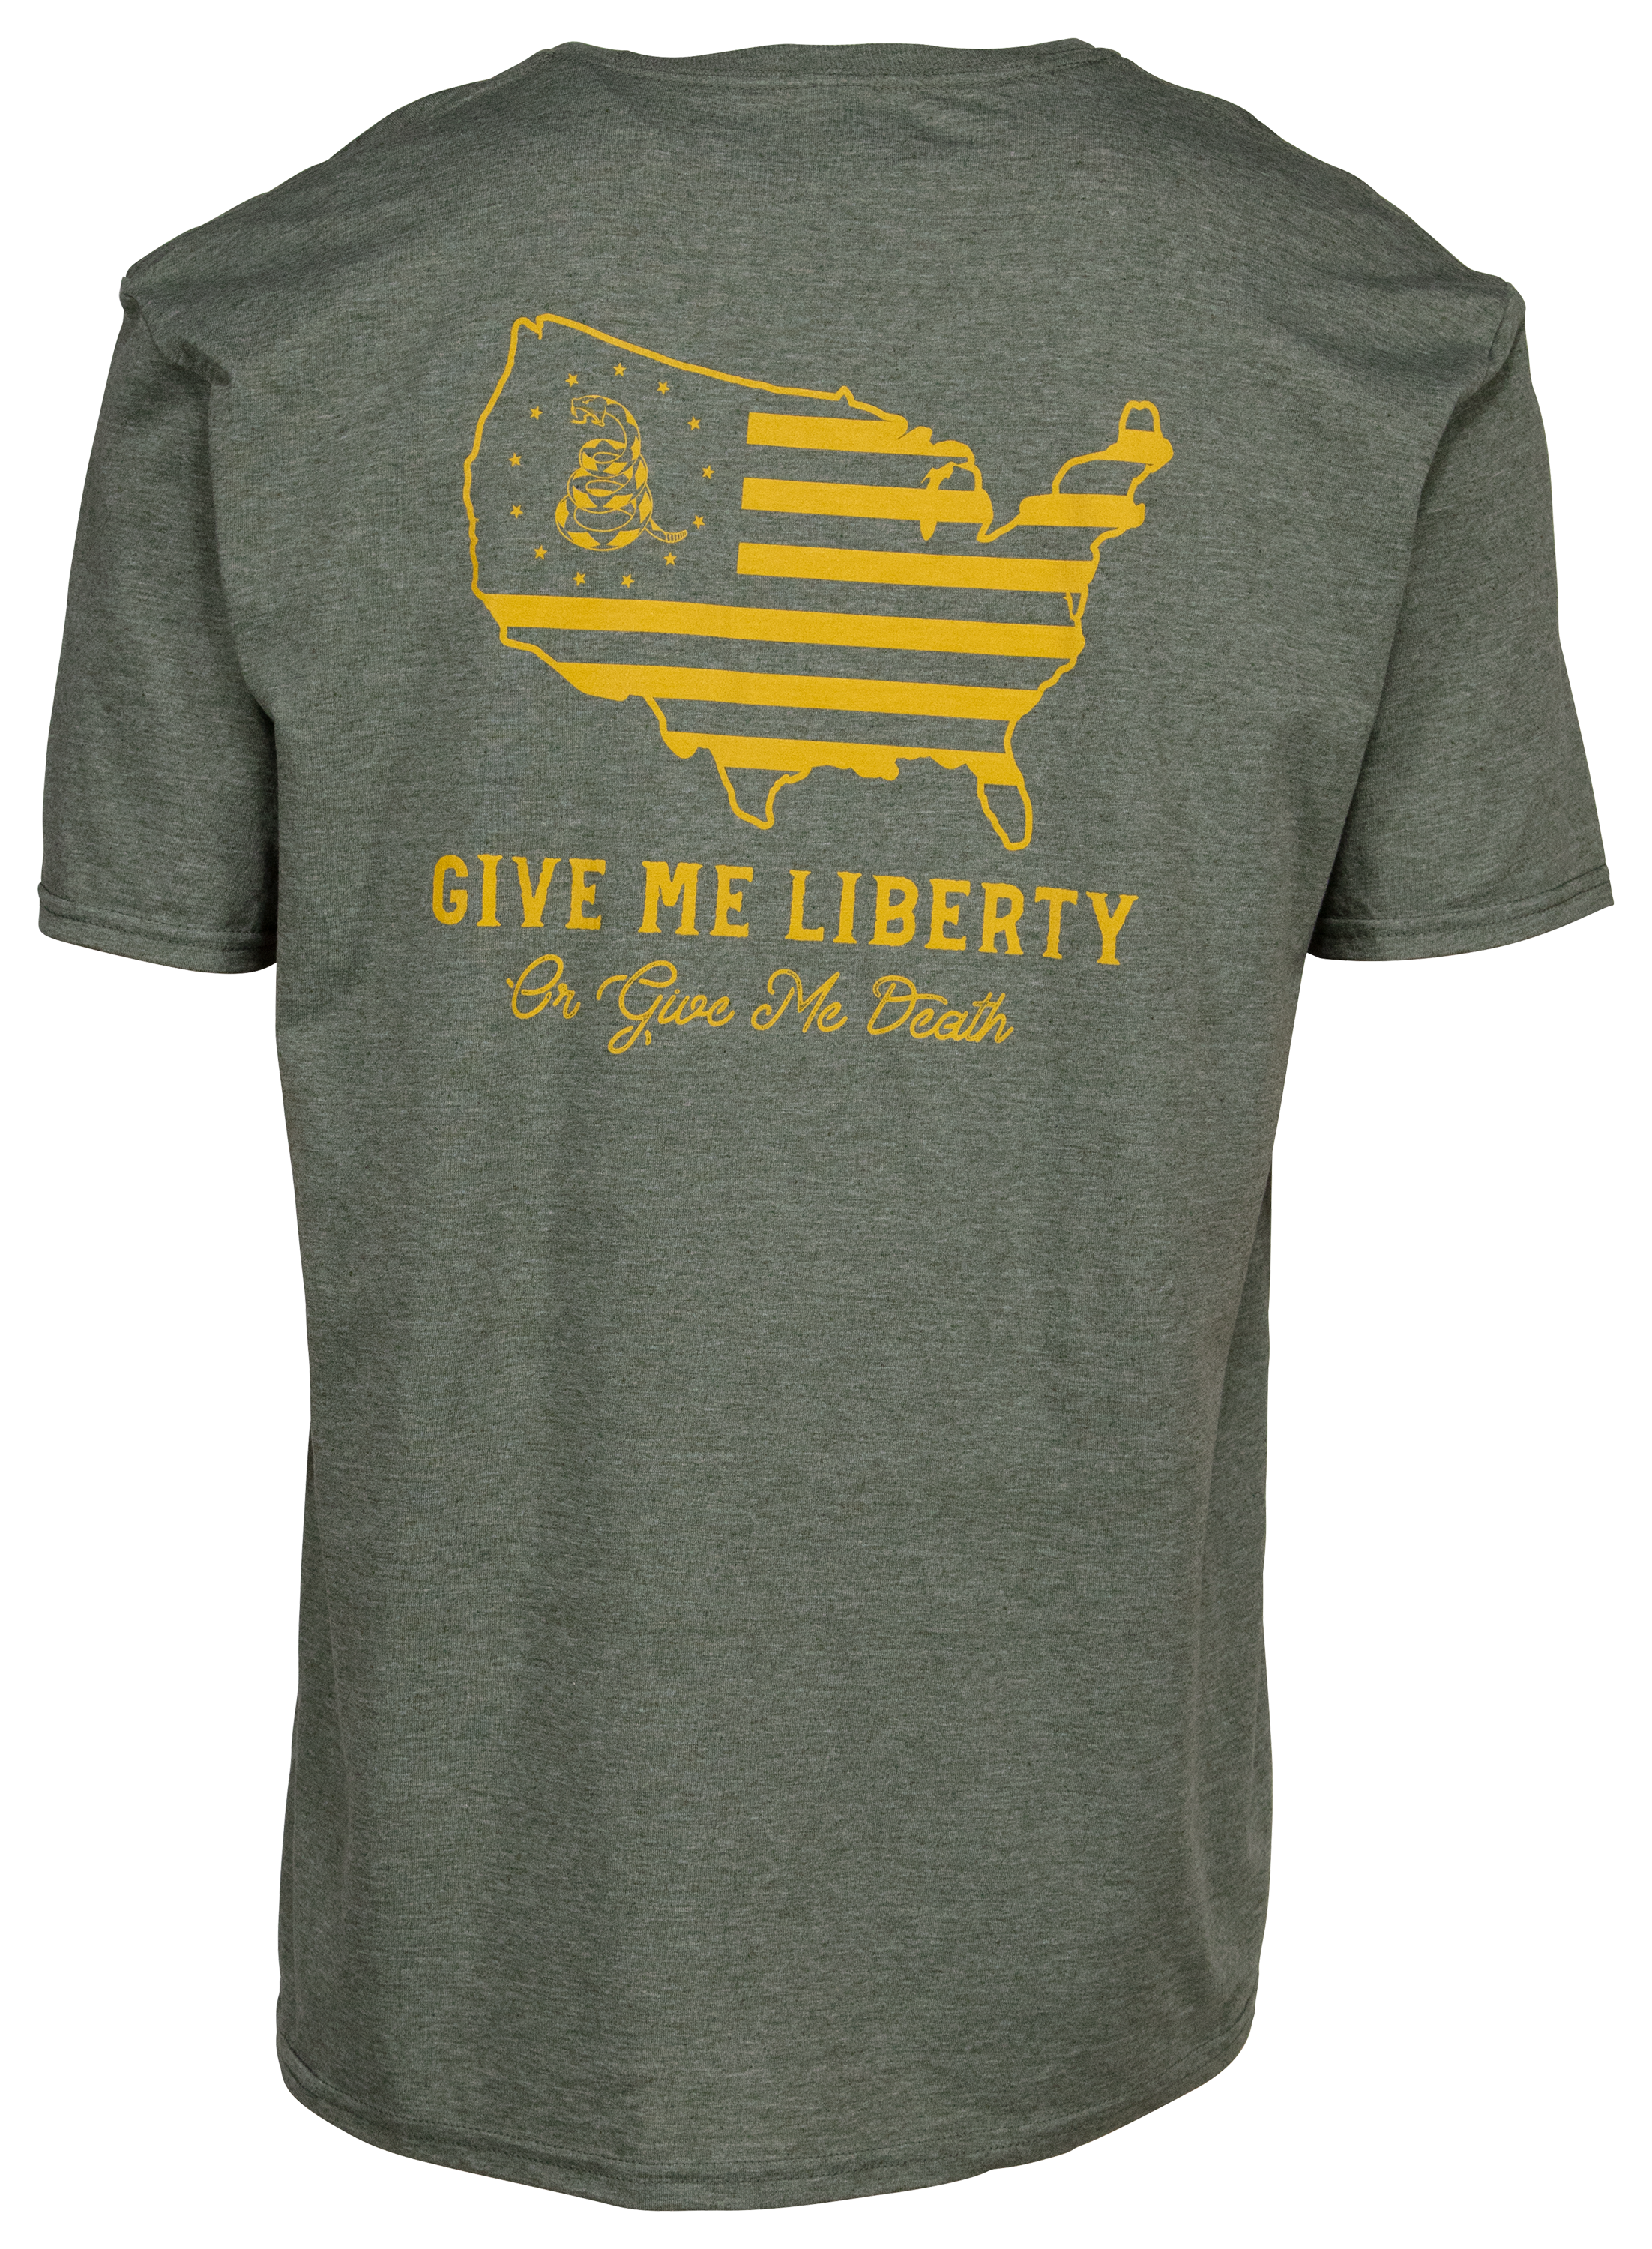 5.11 Tactical Give Me Liberty Short-Sleeve T-Shirt for Men - Military Green Heather - L